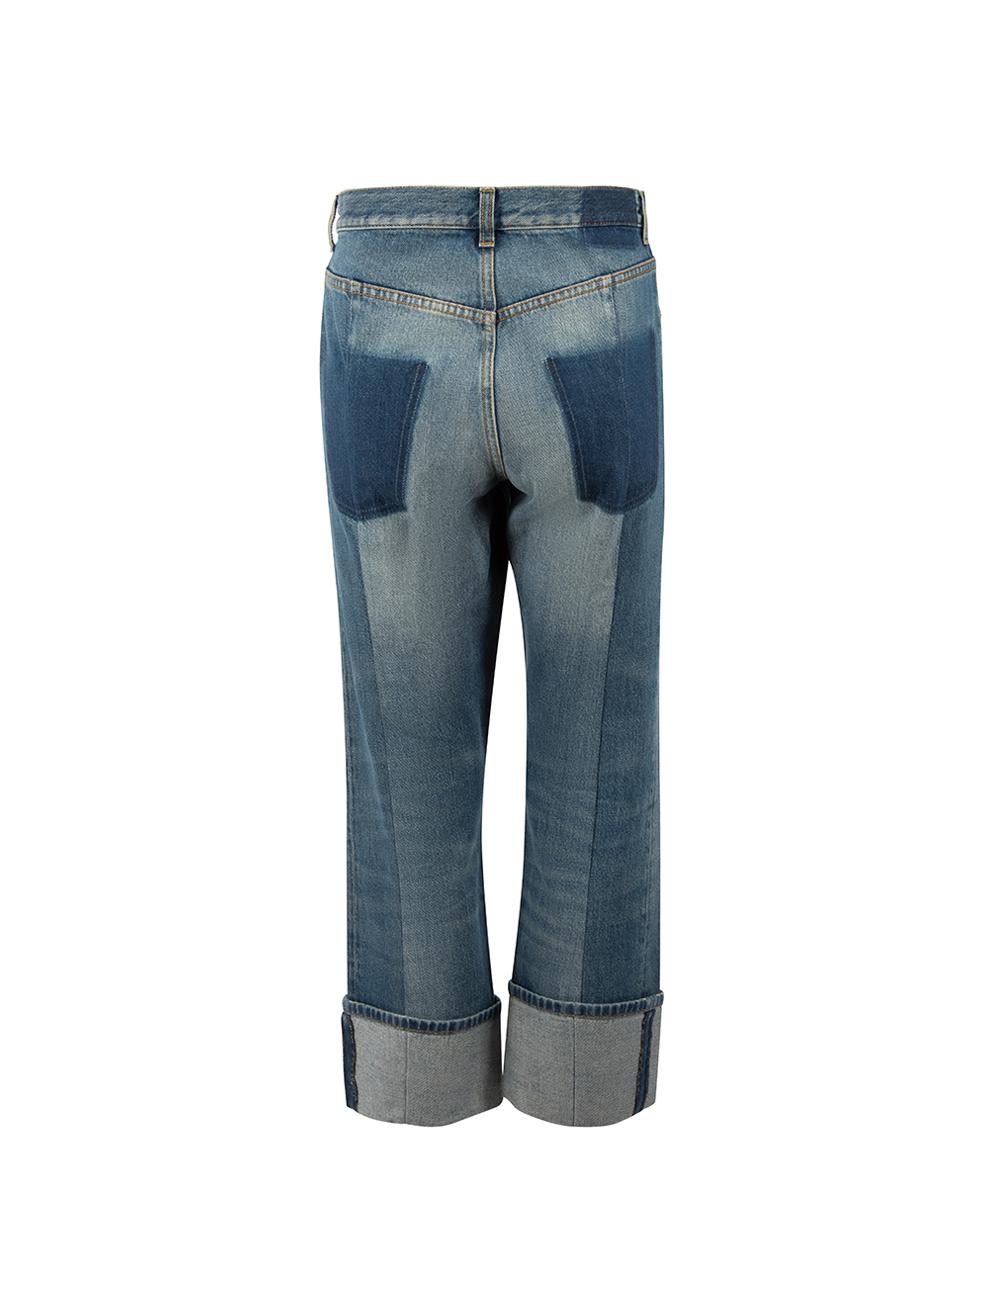 Alexander McQueen Blue Distressed Cuffed Boyfriend Jeans Size M In Good Condition For Sale In London, GB